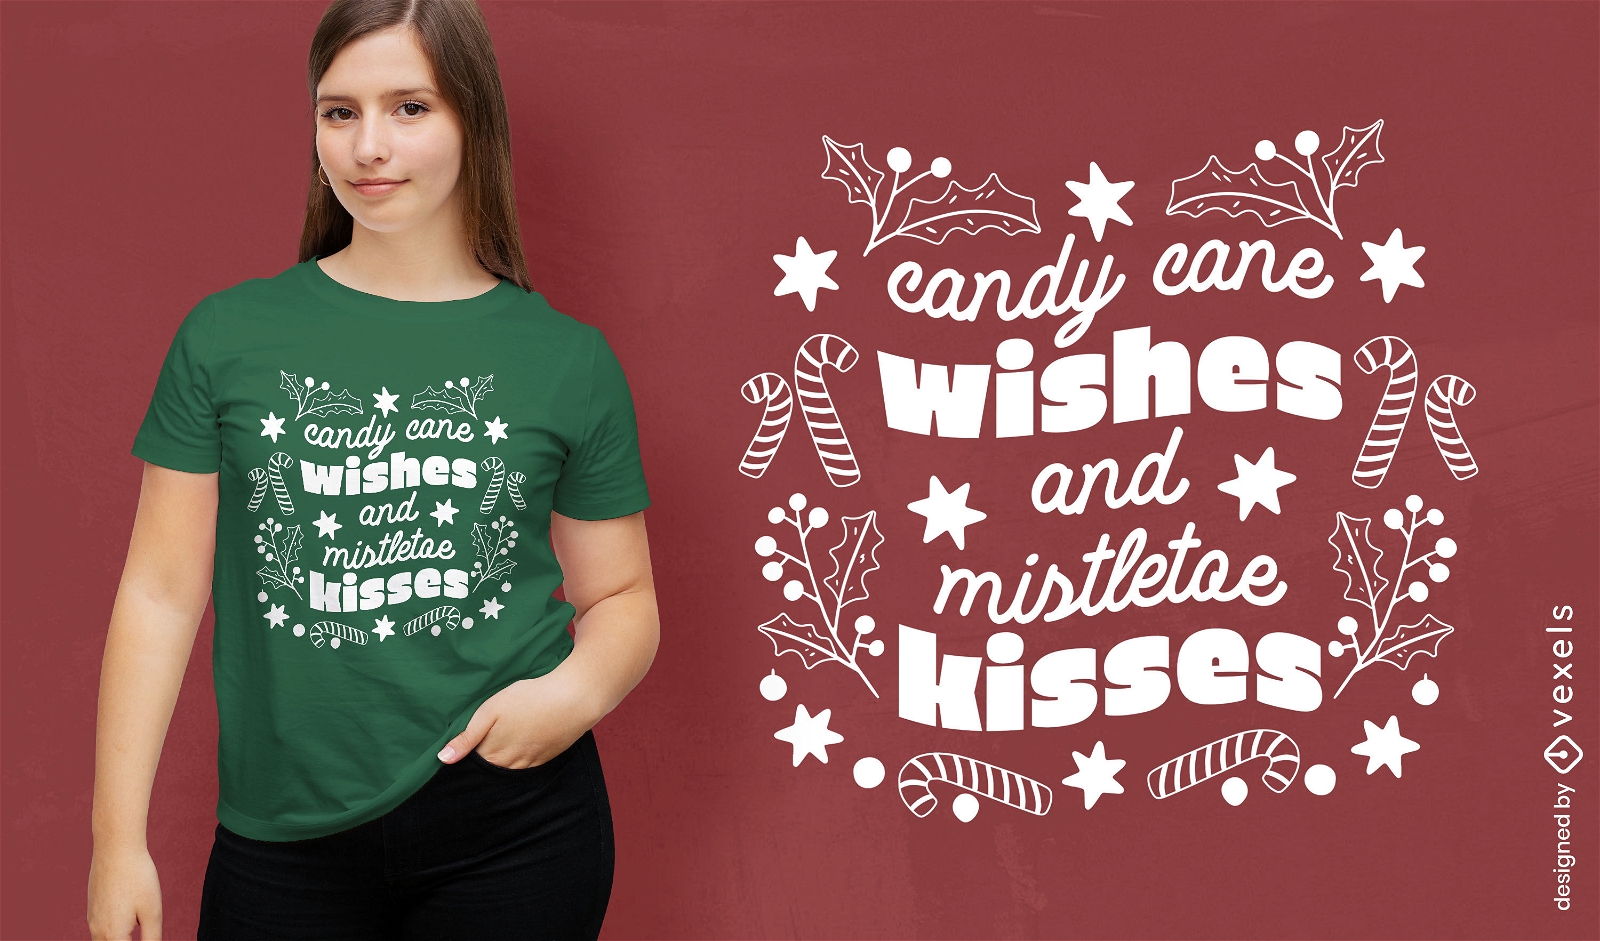 Candy cane and mistletoe quote t-shirt design